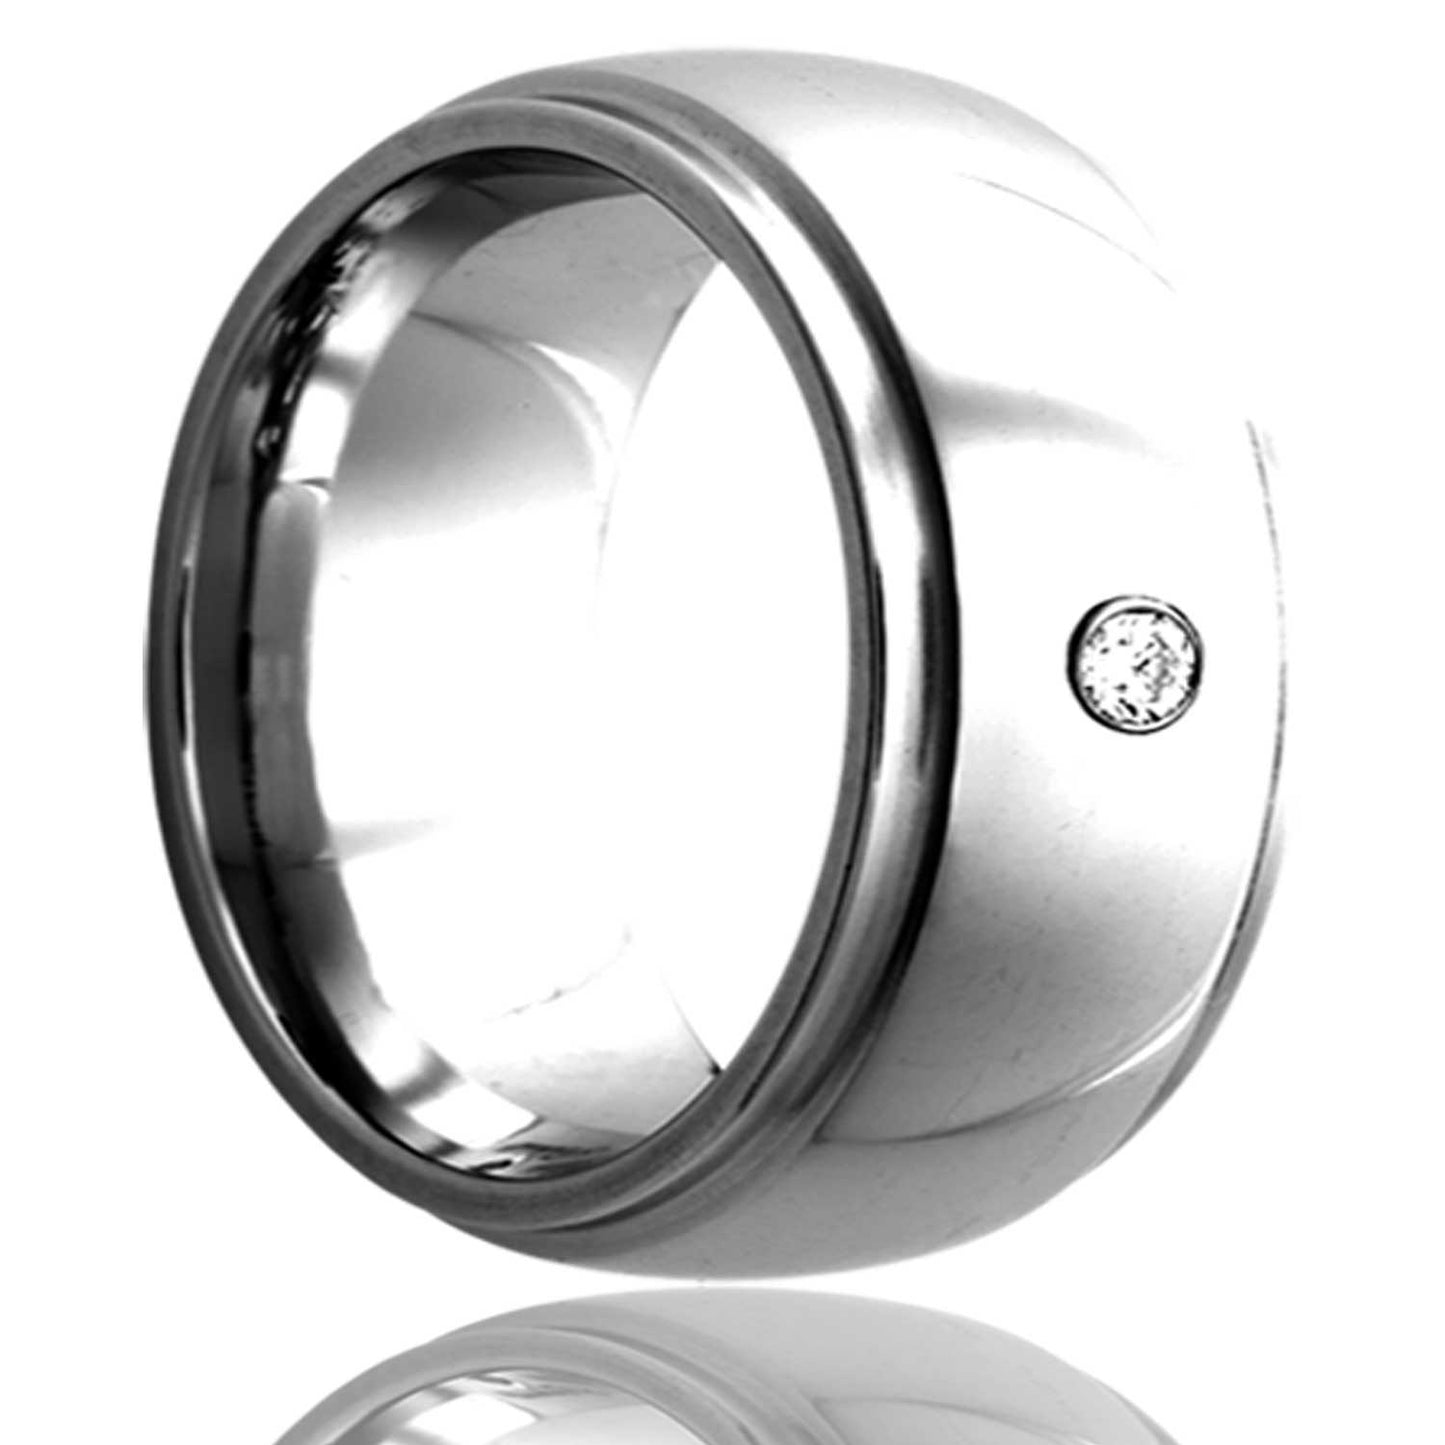 A domed cobalt wedding band with stepped edges & diamond displayed on a neutral white background.